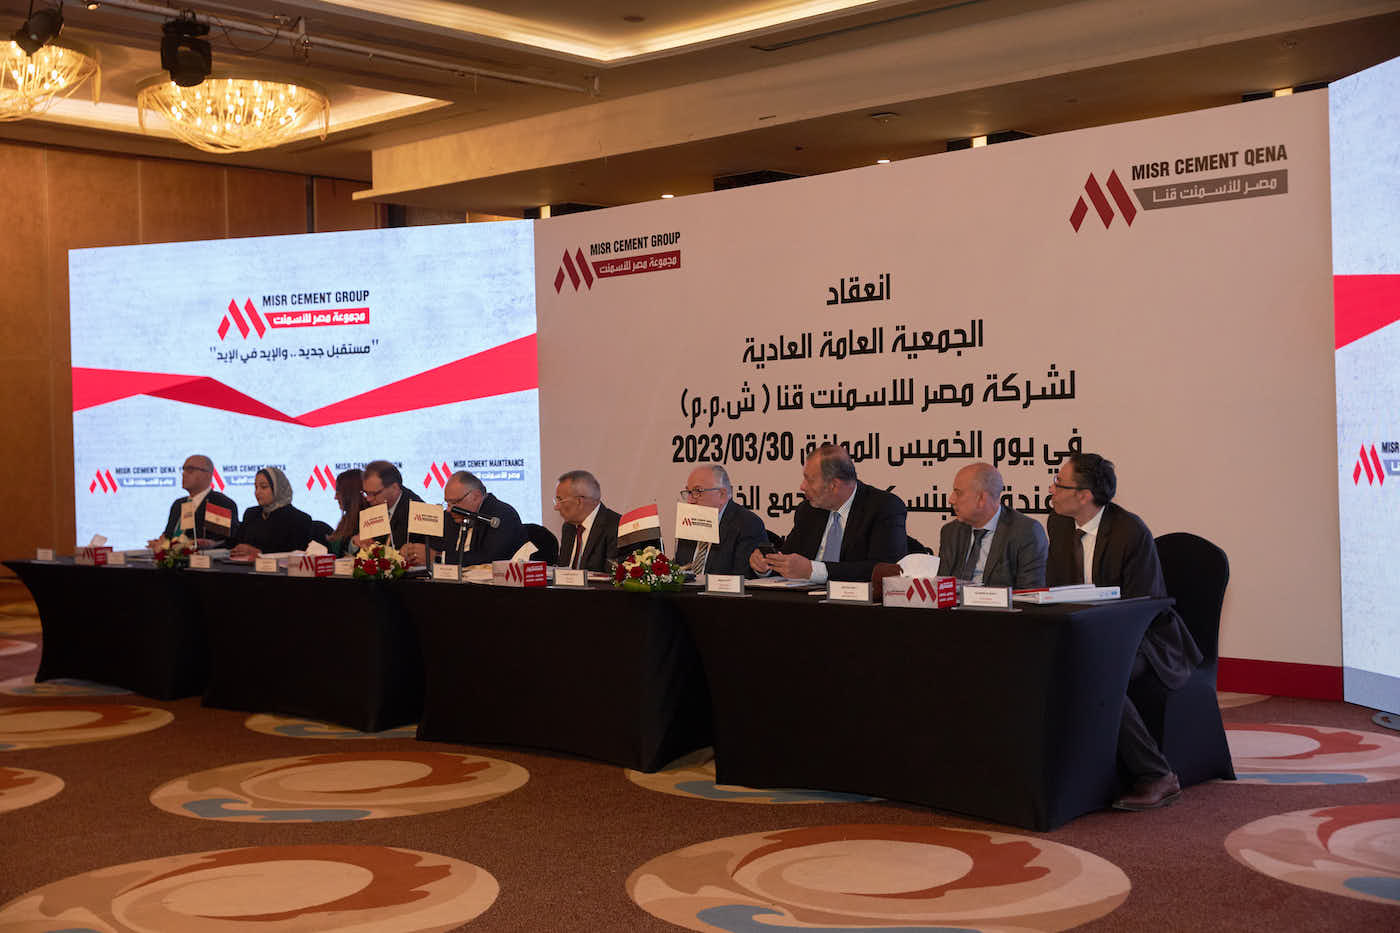 Misr Cement Group - Gallery - Misr Cement Qena Annual General Assembly 2023 - 16